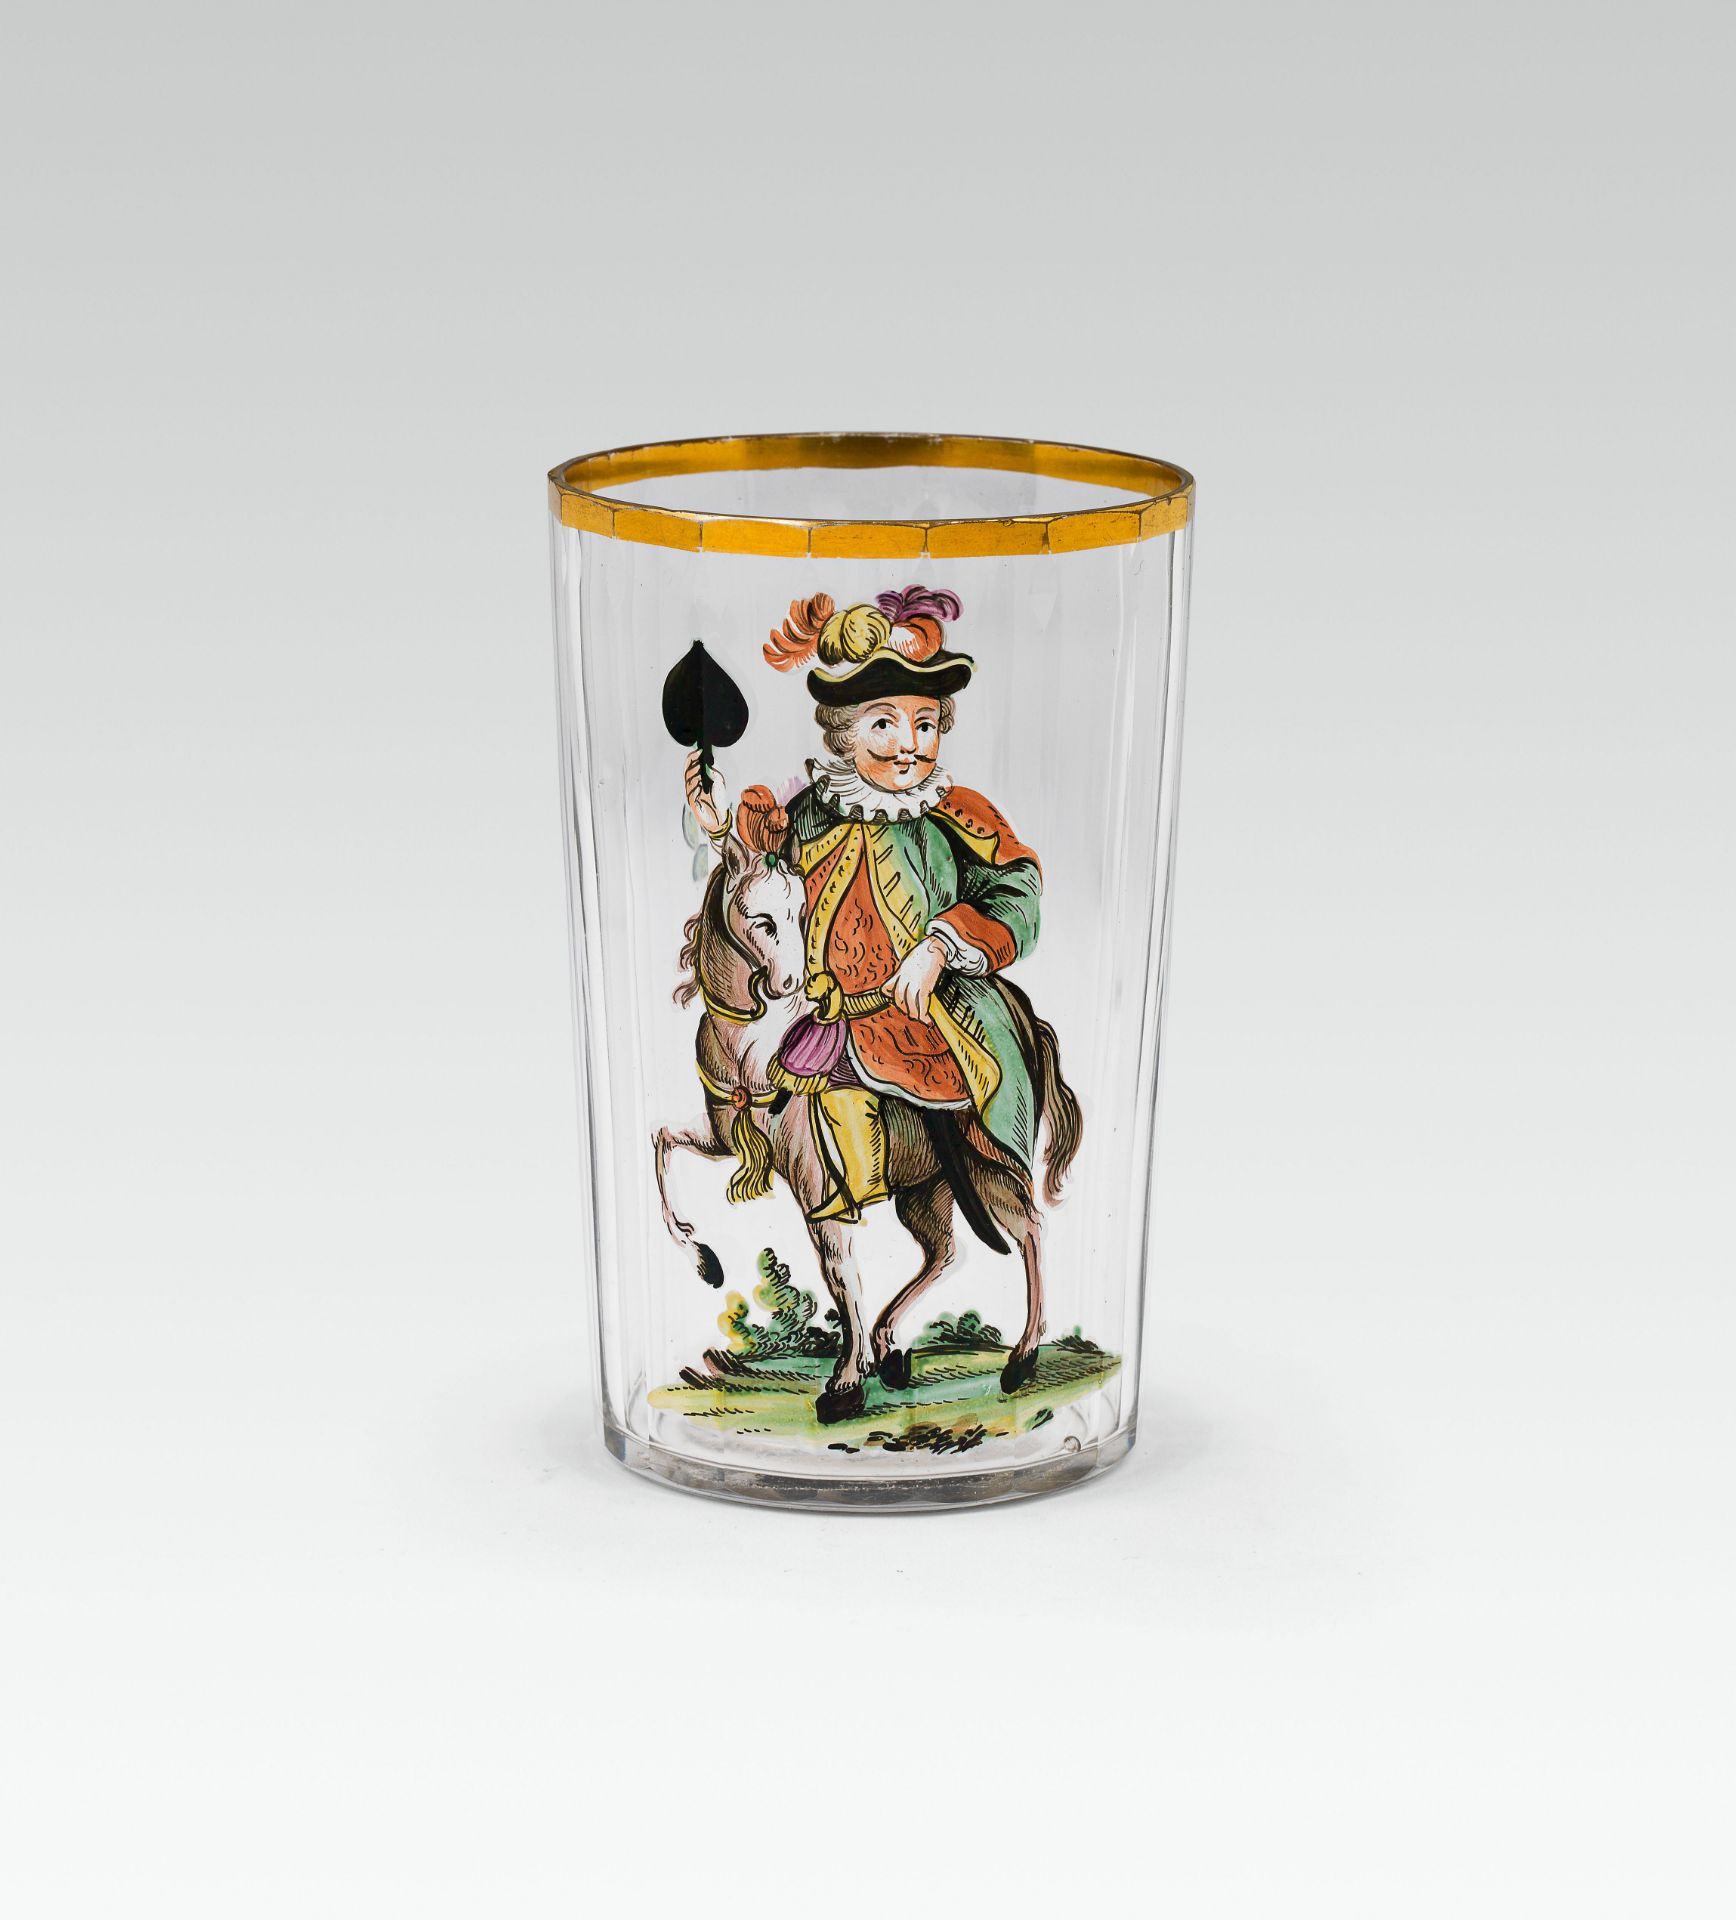 3 Glassescolourless glass, polished; enamel colour; 1 glass with 3 minor chippings at the liph. 11.4 - Image 4 of 4